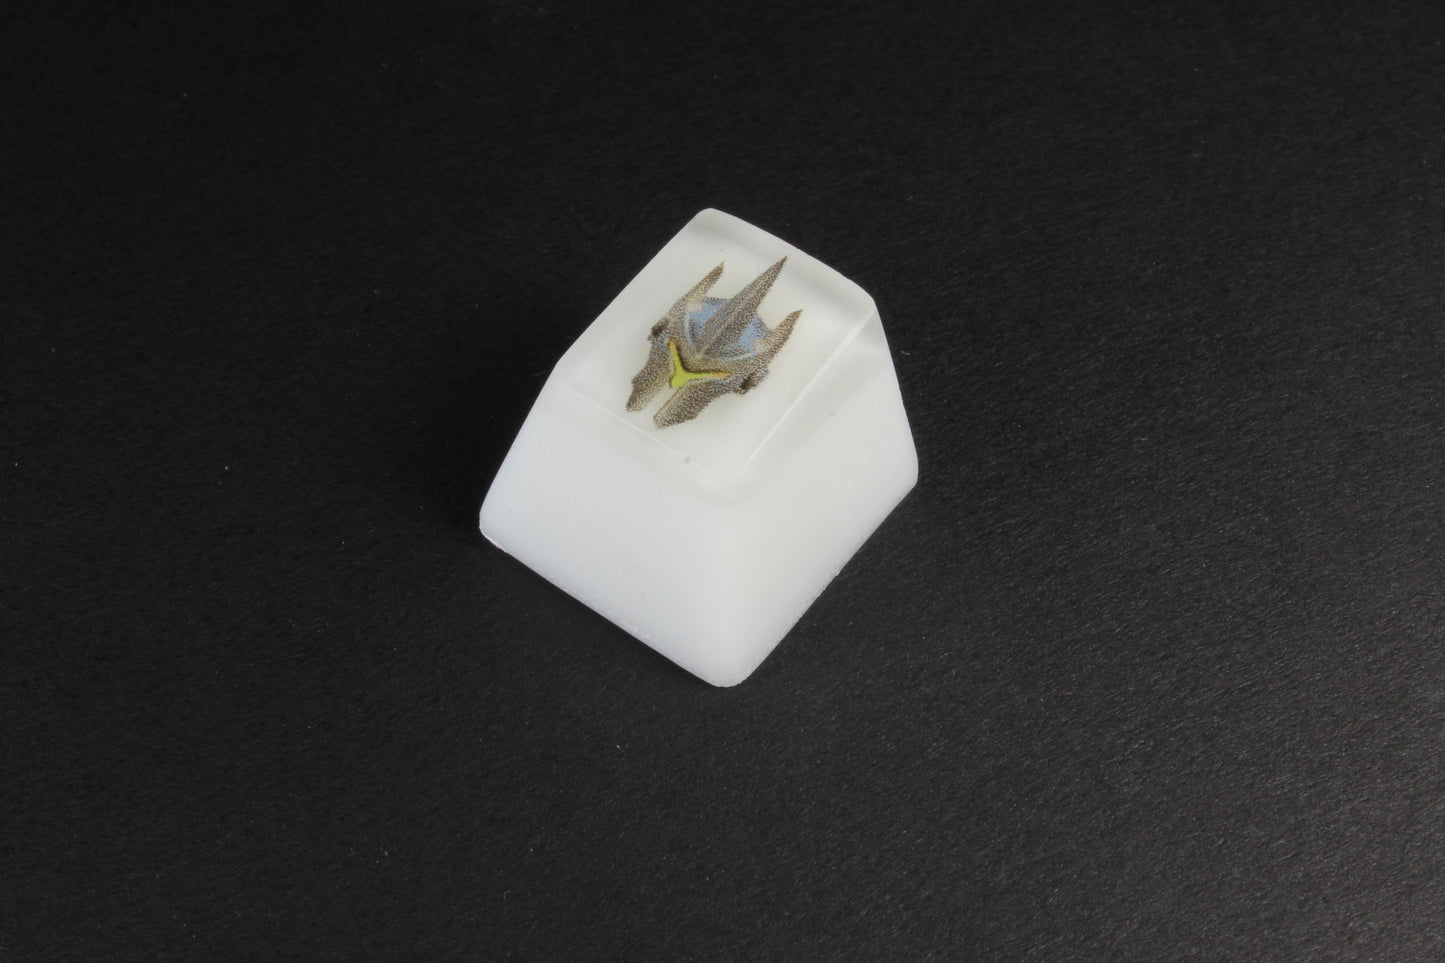 Chaos Caps 1.1 - Reinhardt - PrimeCaps Keycap - Blank and Sculpted Artisan Keycaps for cherry MX mechanical keyboards 